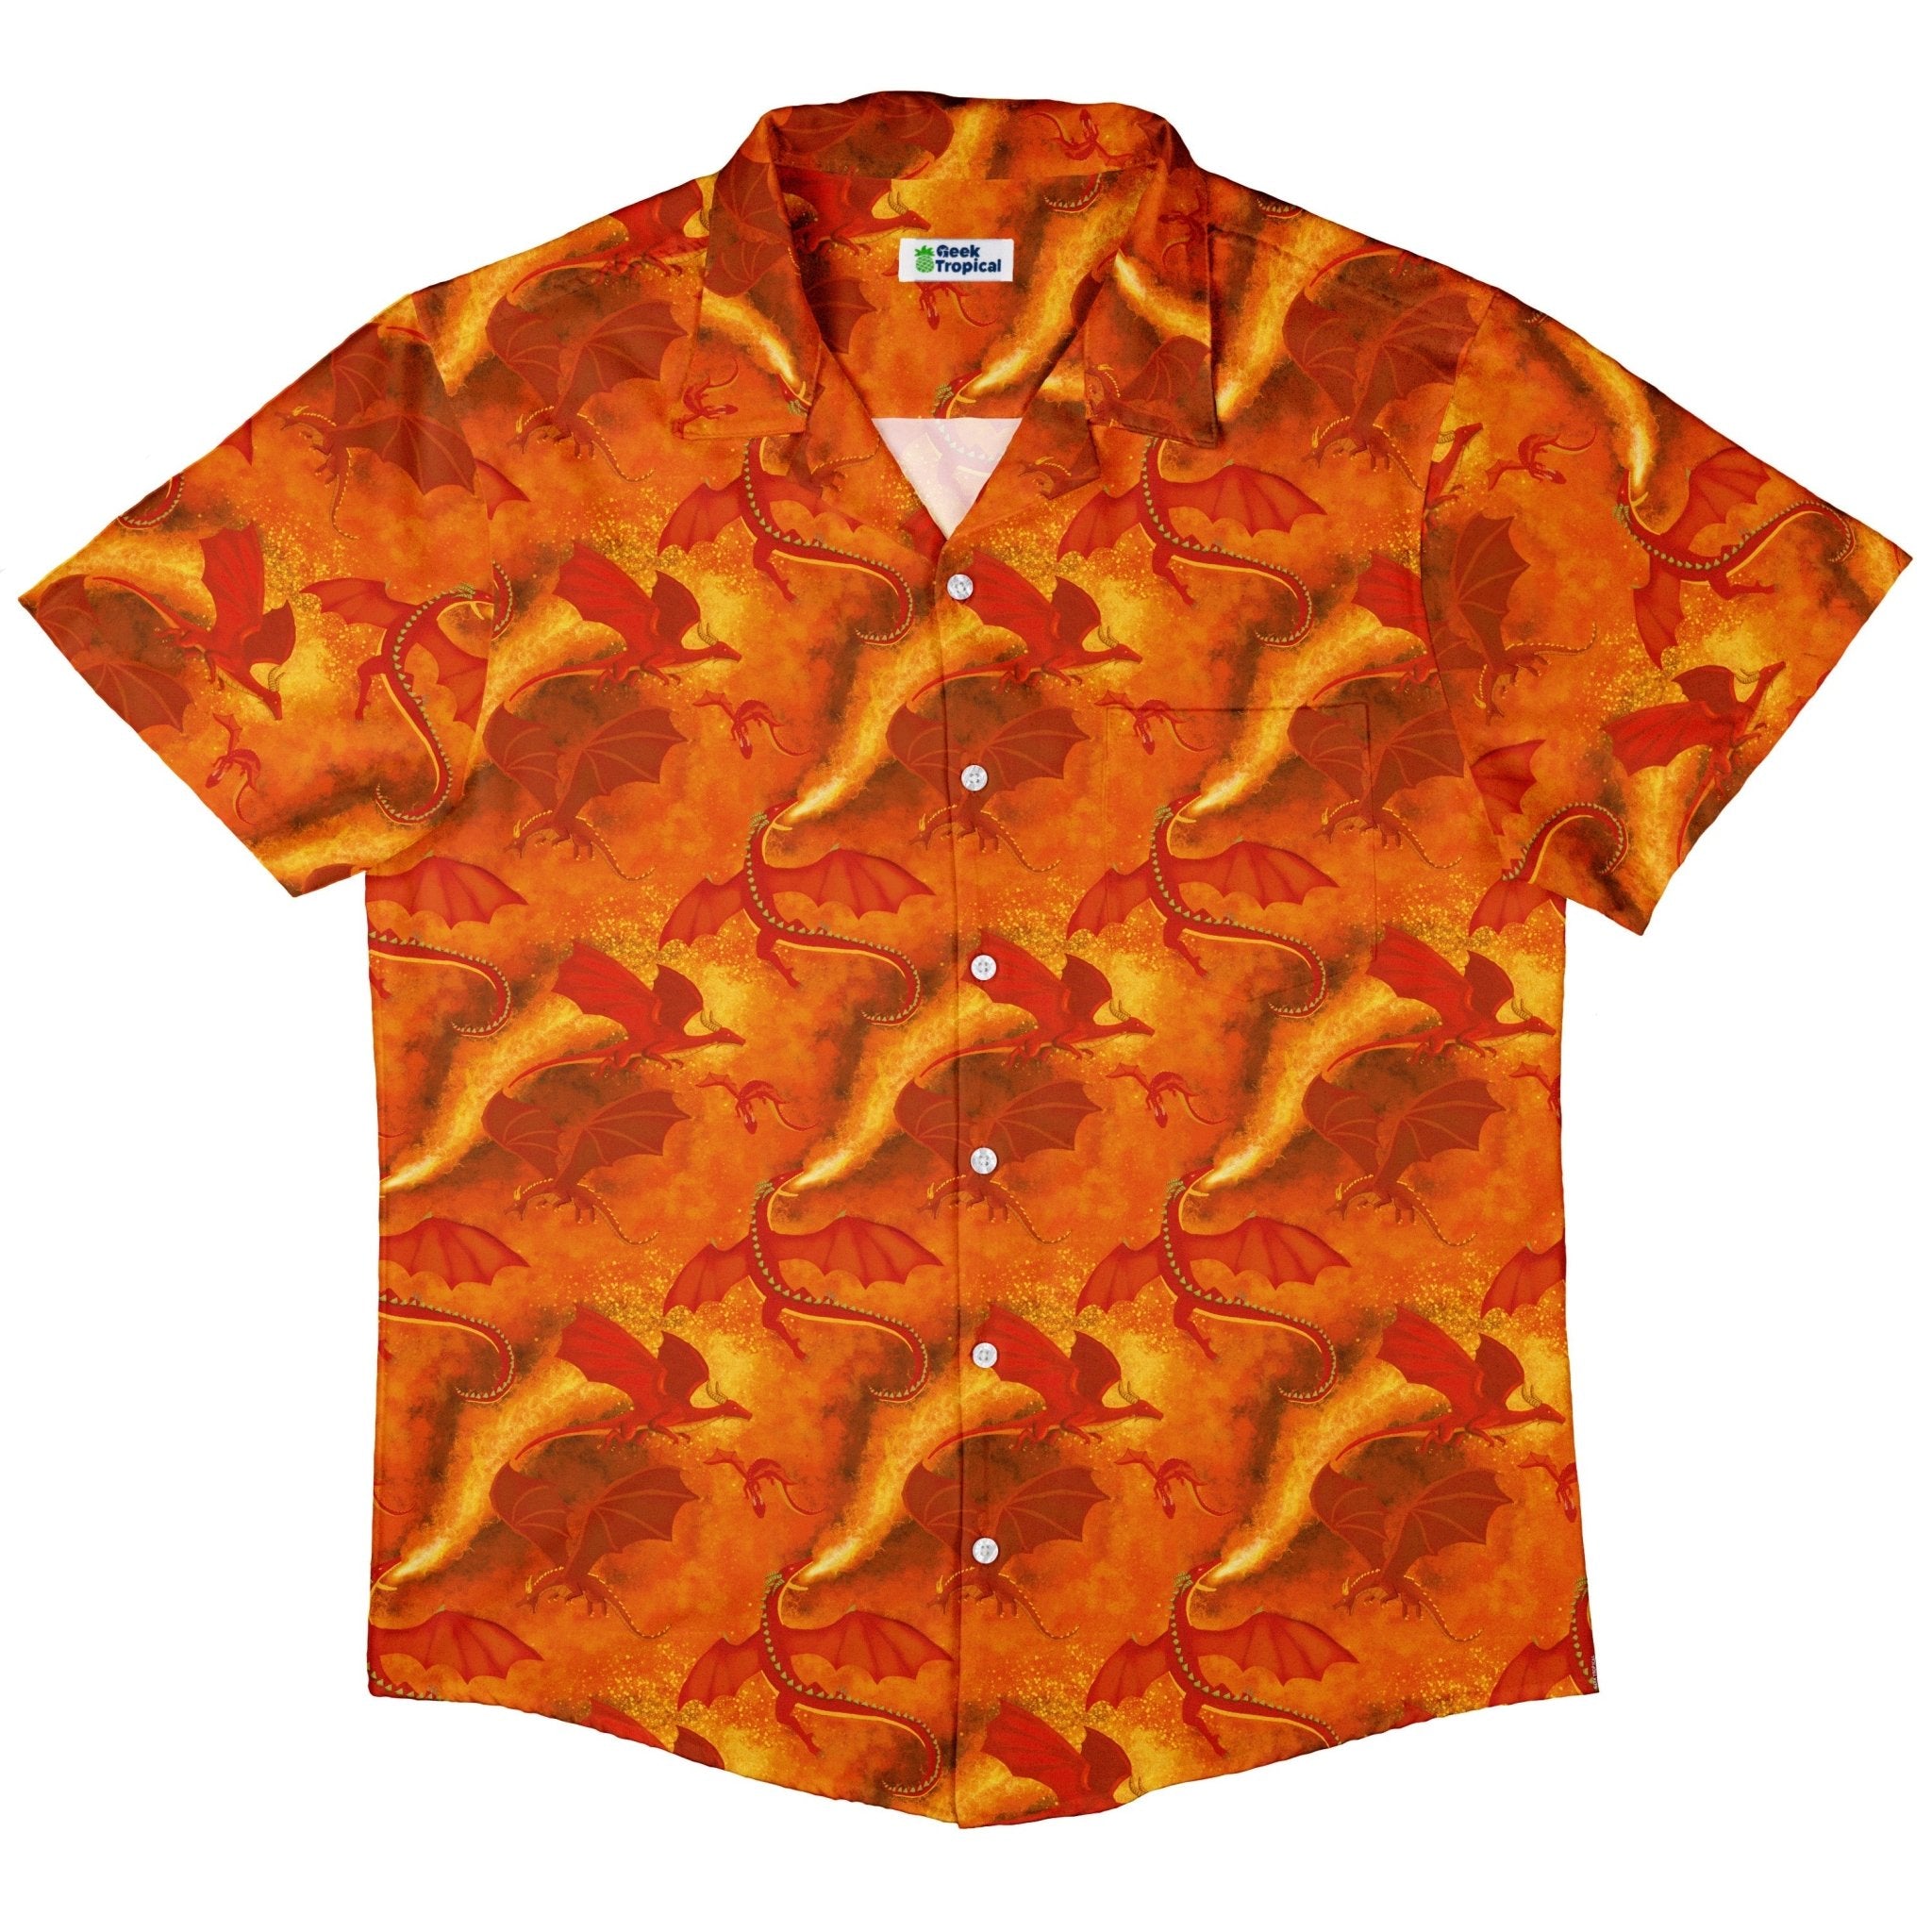 Red Dragon Fire Dnd Button Up Shirt - adult sizing - Animal Patterns - Designs by Nathan